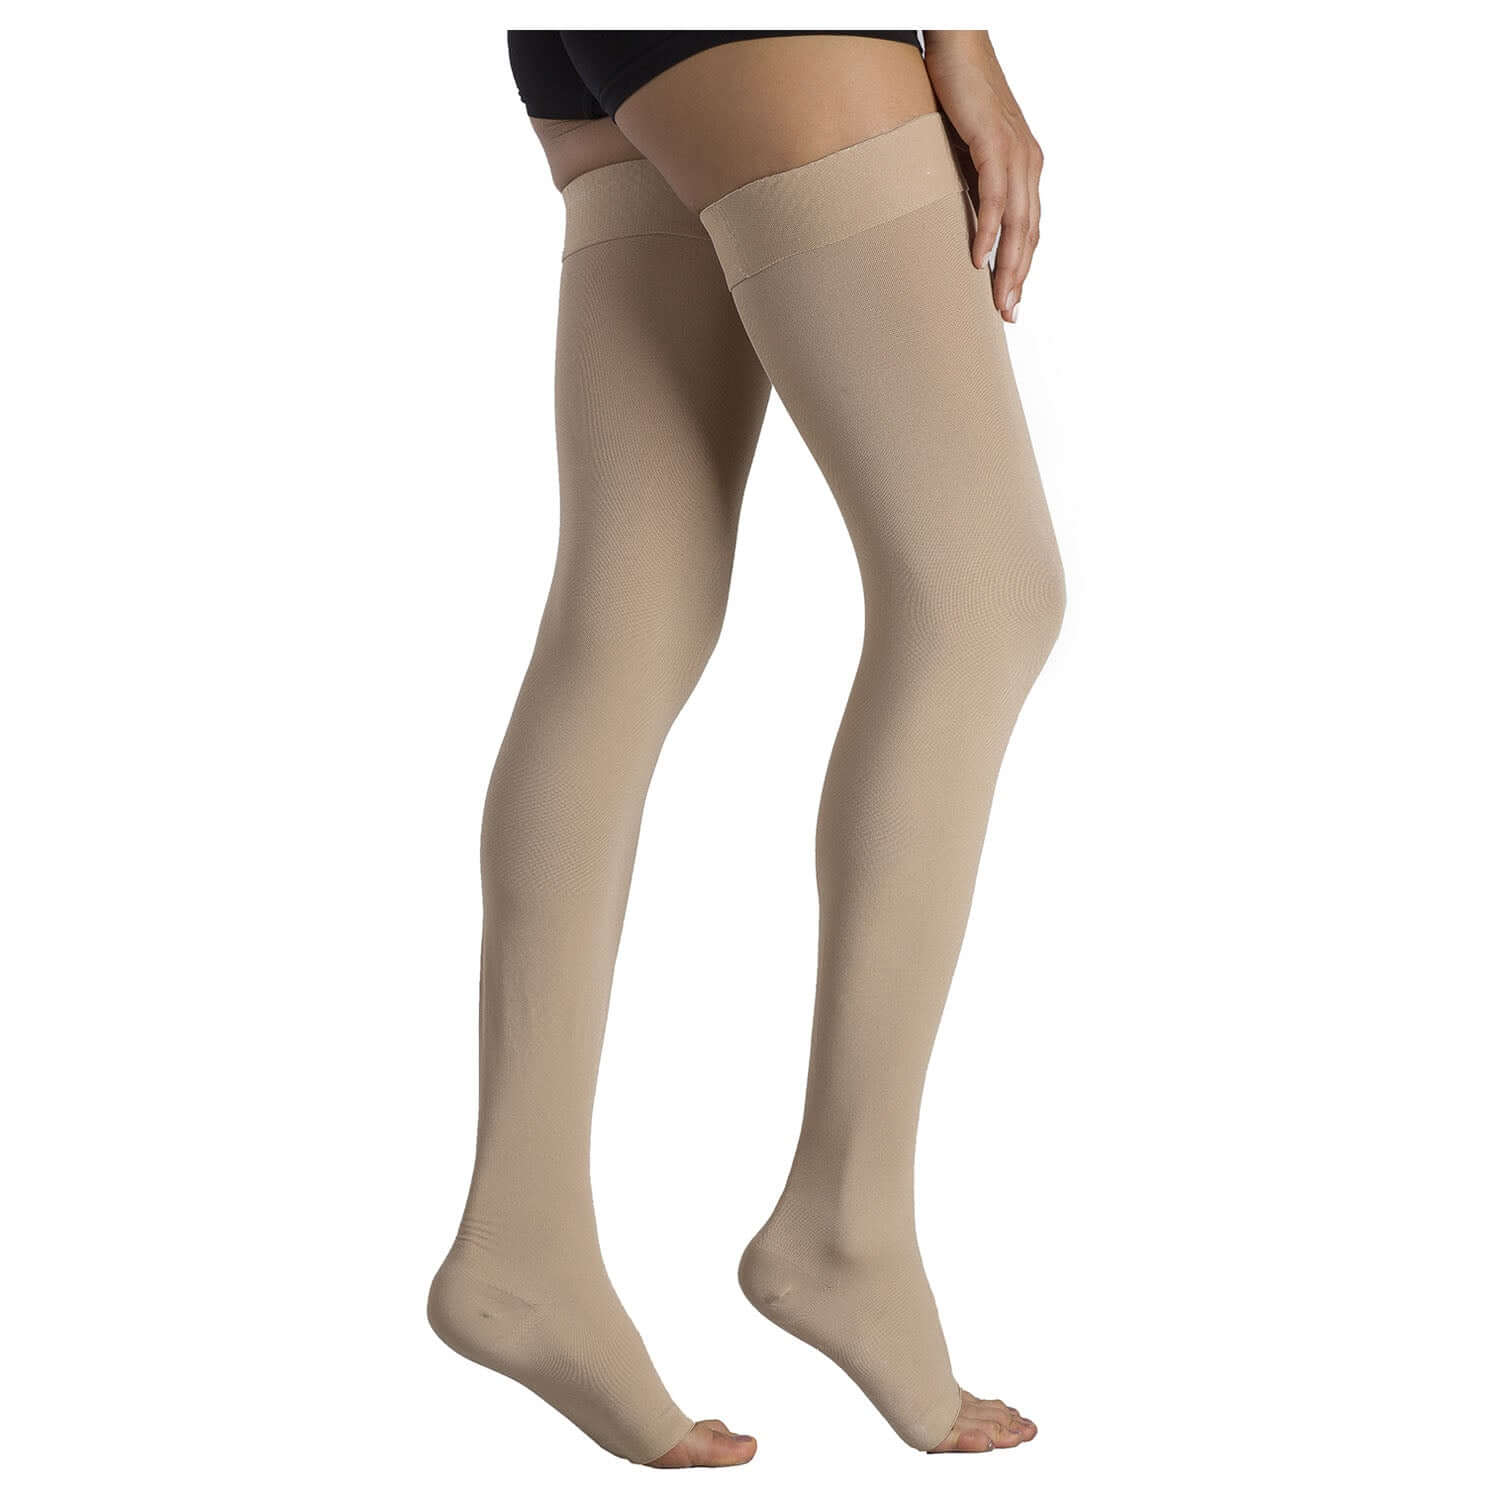 Thigh High Graduated Compression Opaque Stockings, Open-Toe